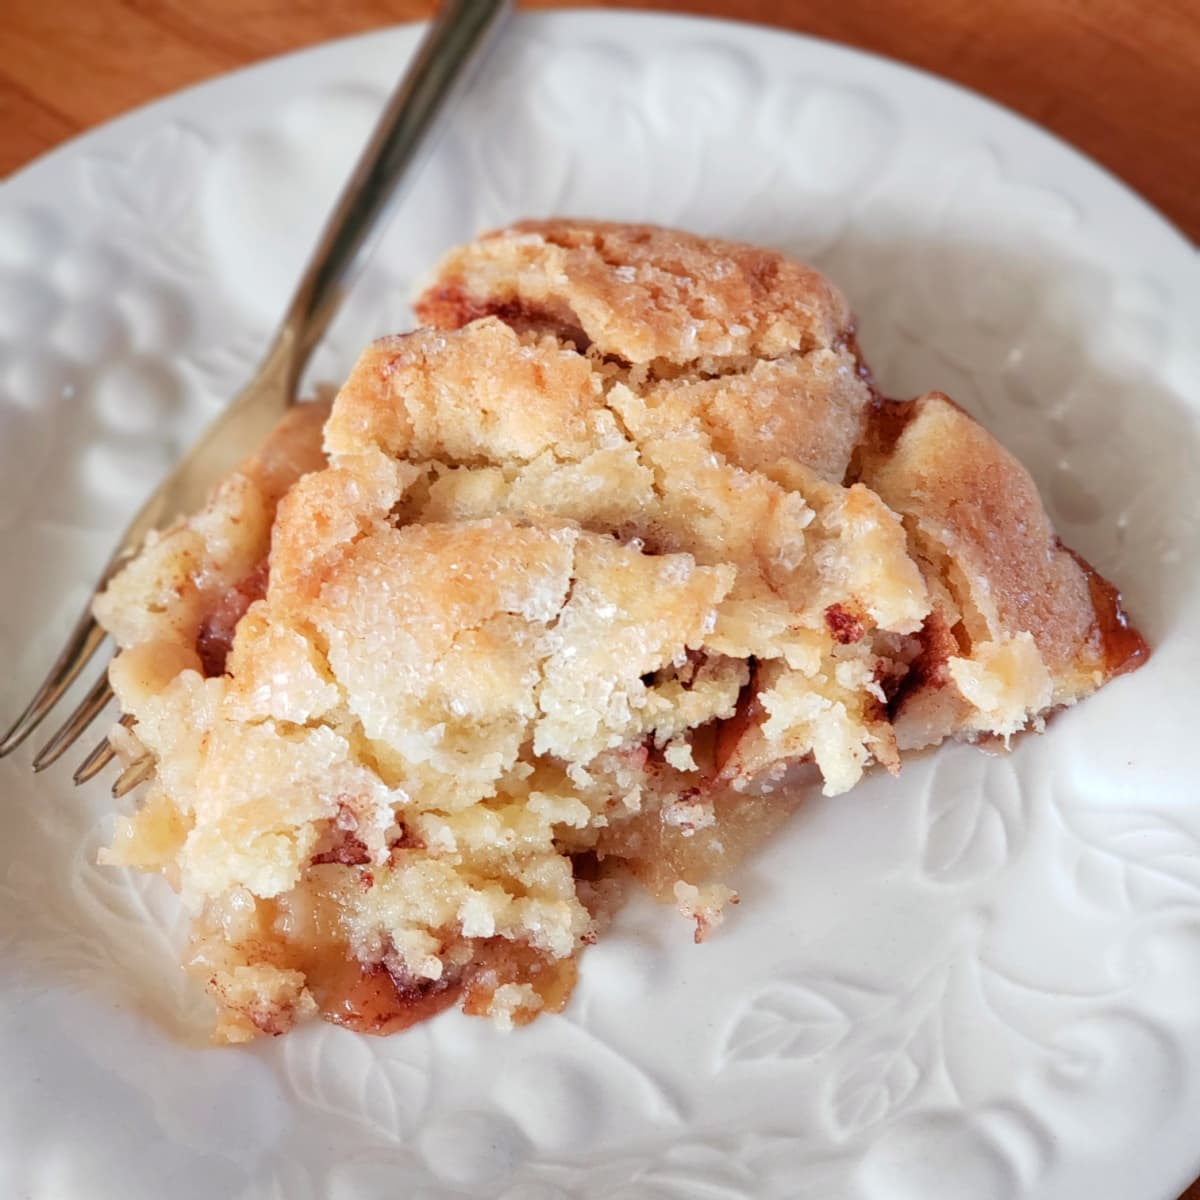 Slice of Swedish Apple Pie on a textured white plate with a fork alongside